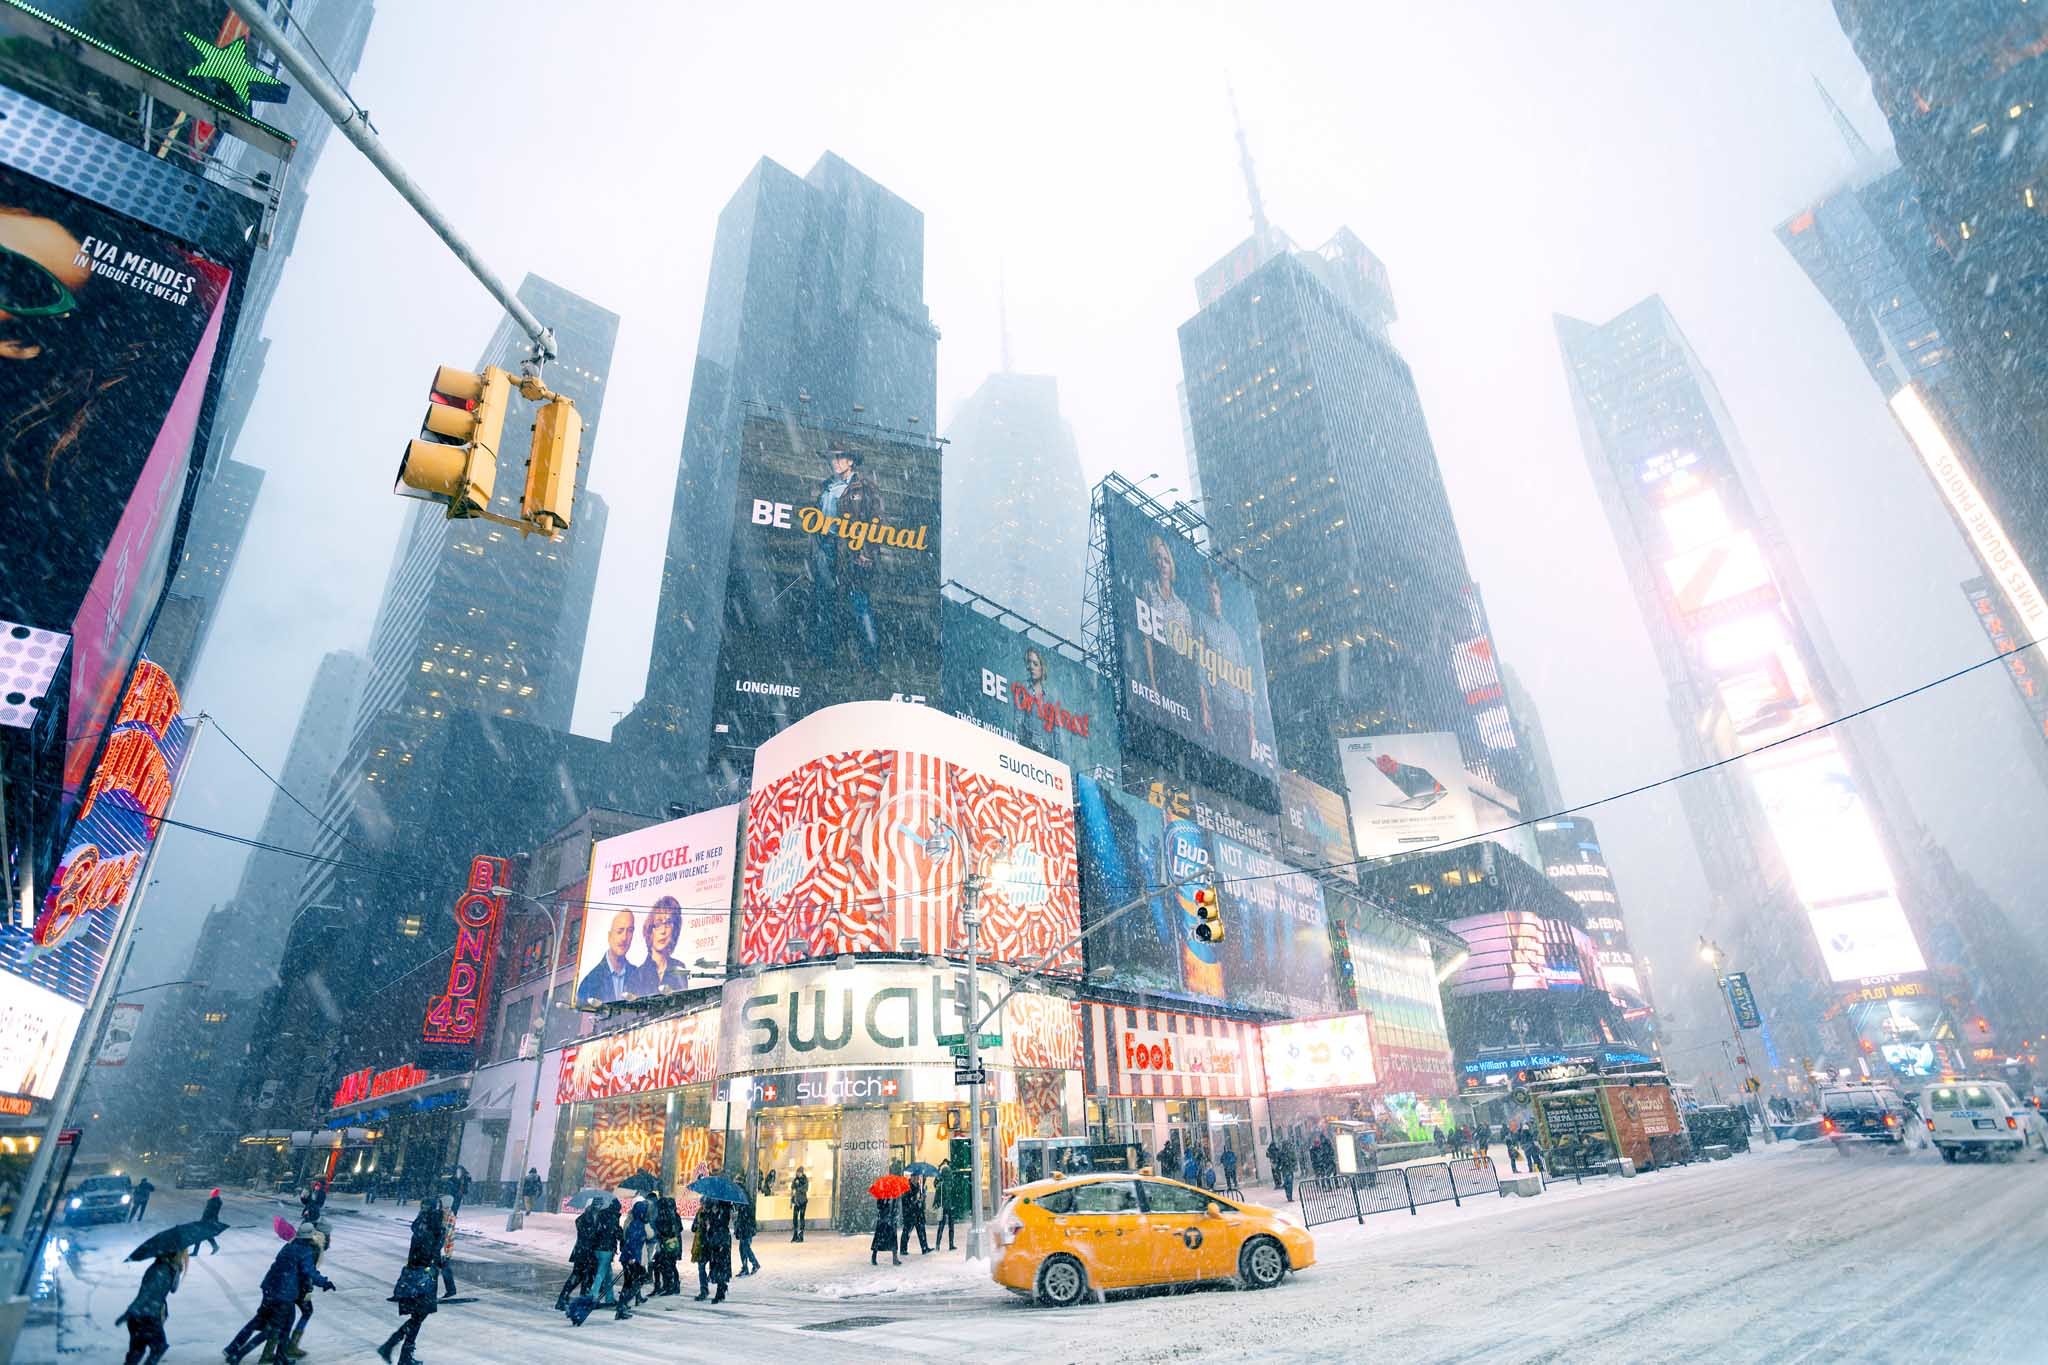 21 things that will happen to you while Christmas shopping in NYC